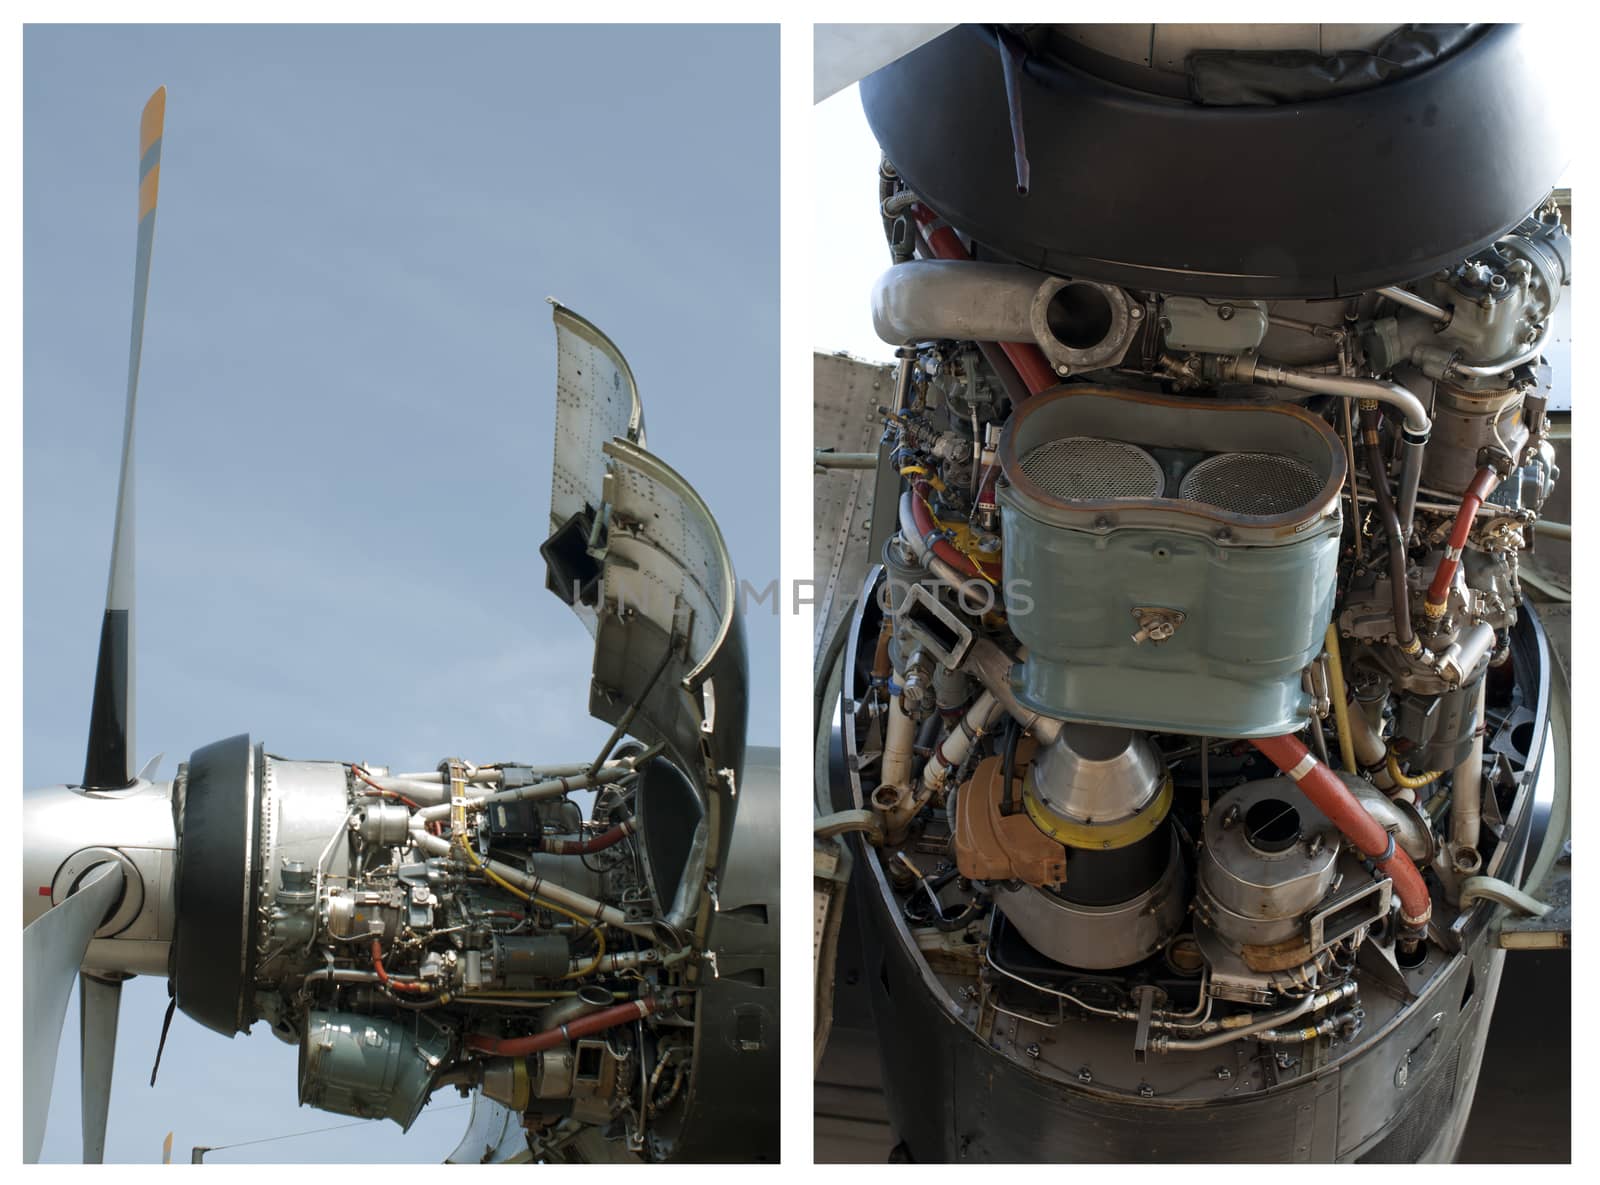 Plane disassembled engine. Two vertical images